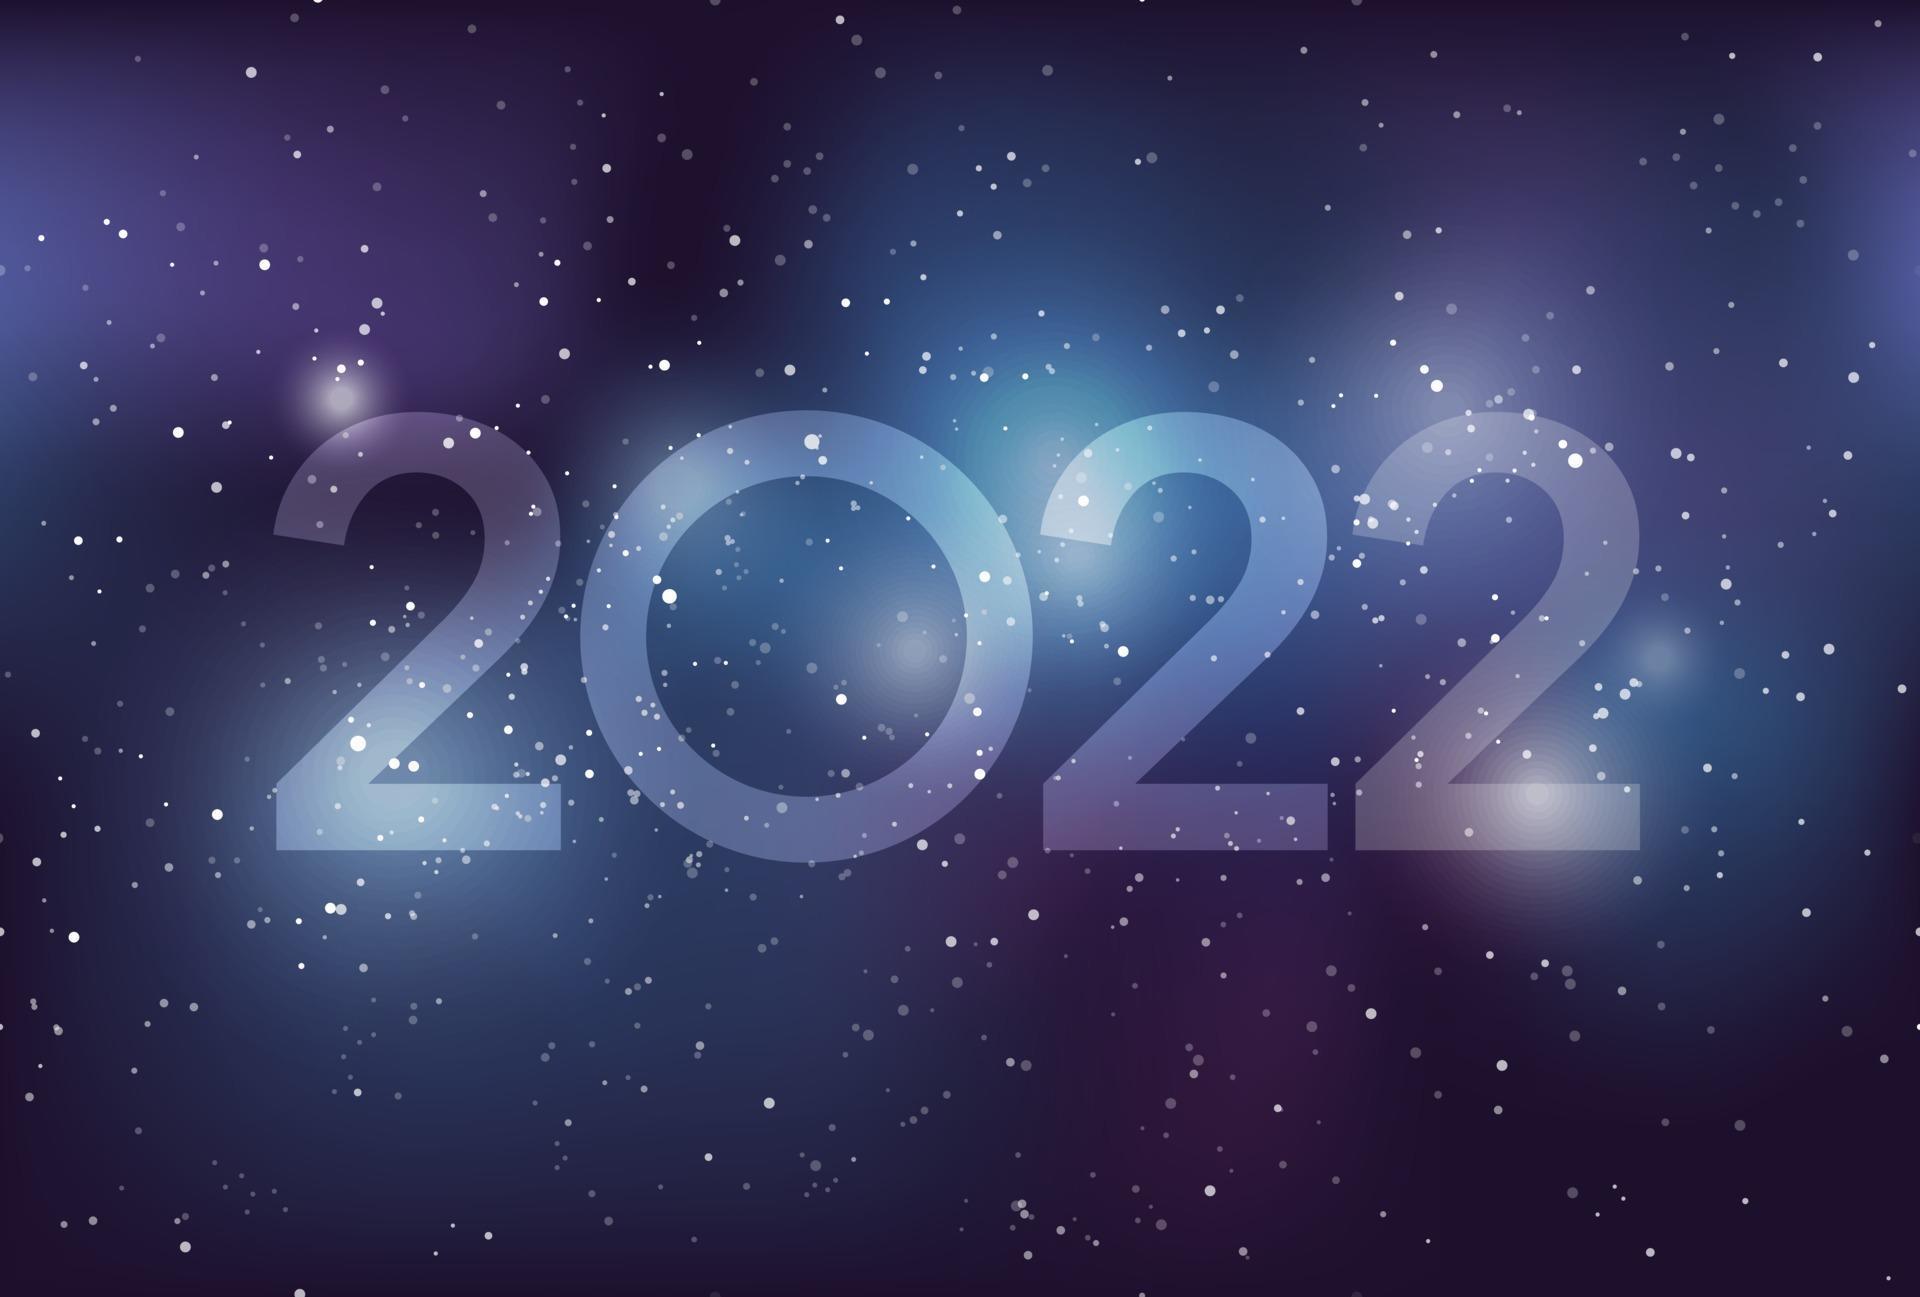 The Year 2022 Greeting Card Template With Milky Way Galaxy. 2947321